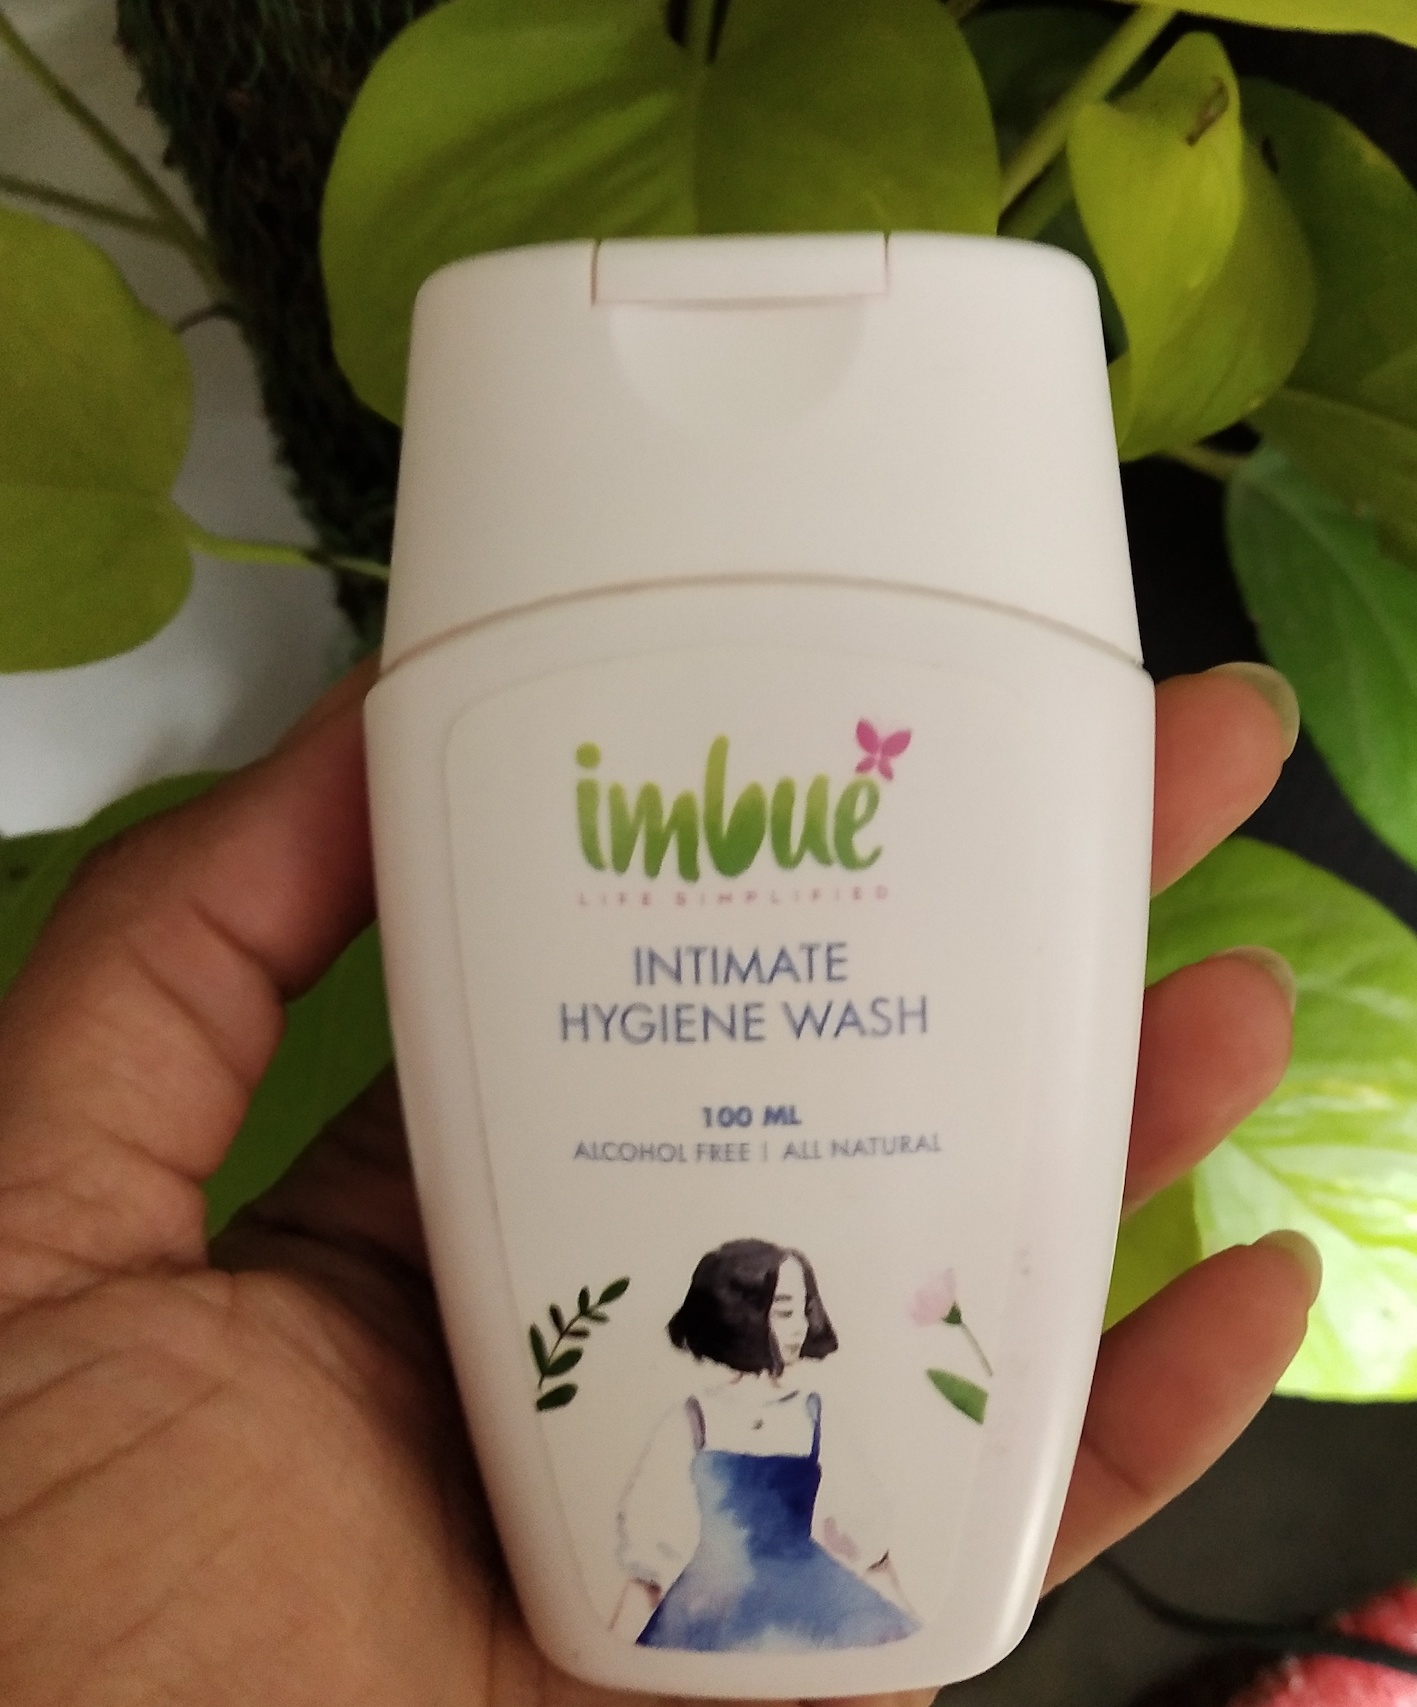 Do you need Female Hygiene Products? It is the Vulva and not Vagina that needs mild cleaning with Natural products like Imbue Intimate Hygiene Wash #Femininewash #imbuewash #hygienewash #vaginalwash #intimatewash #intimateproducts